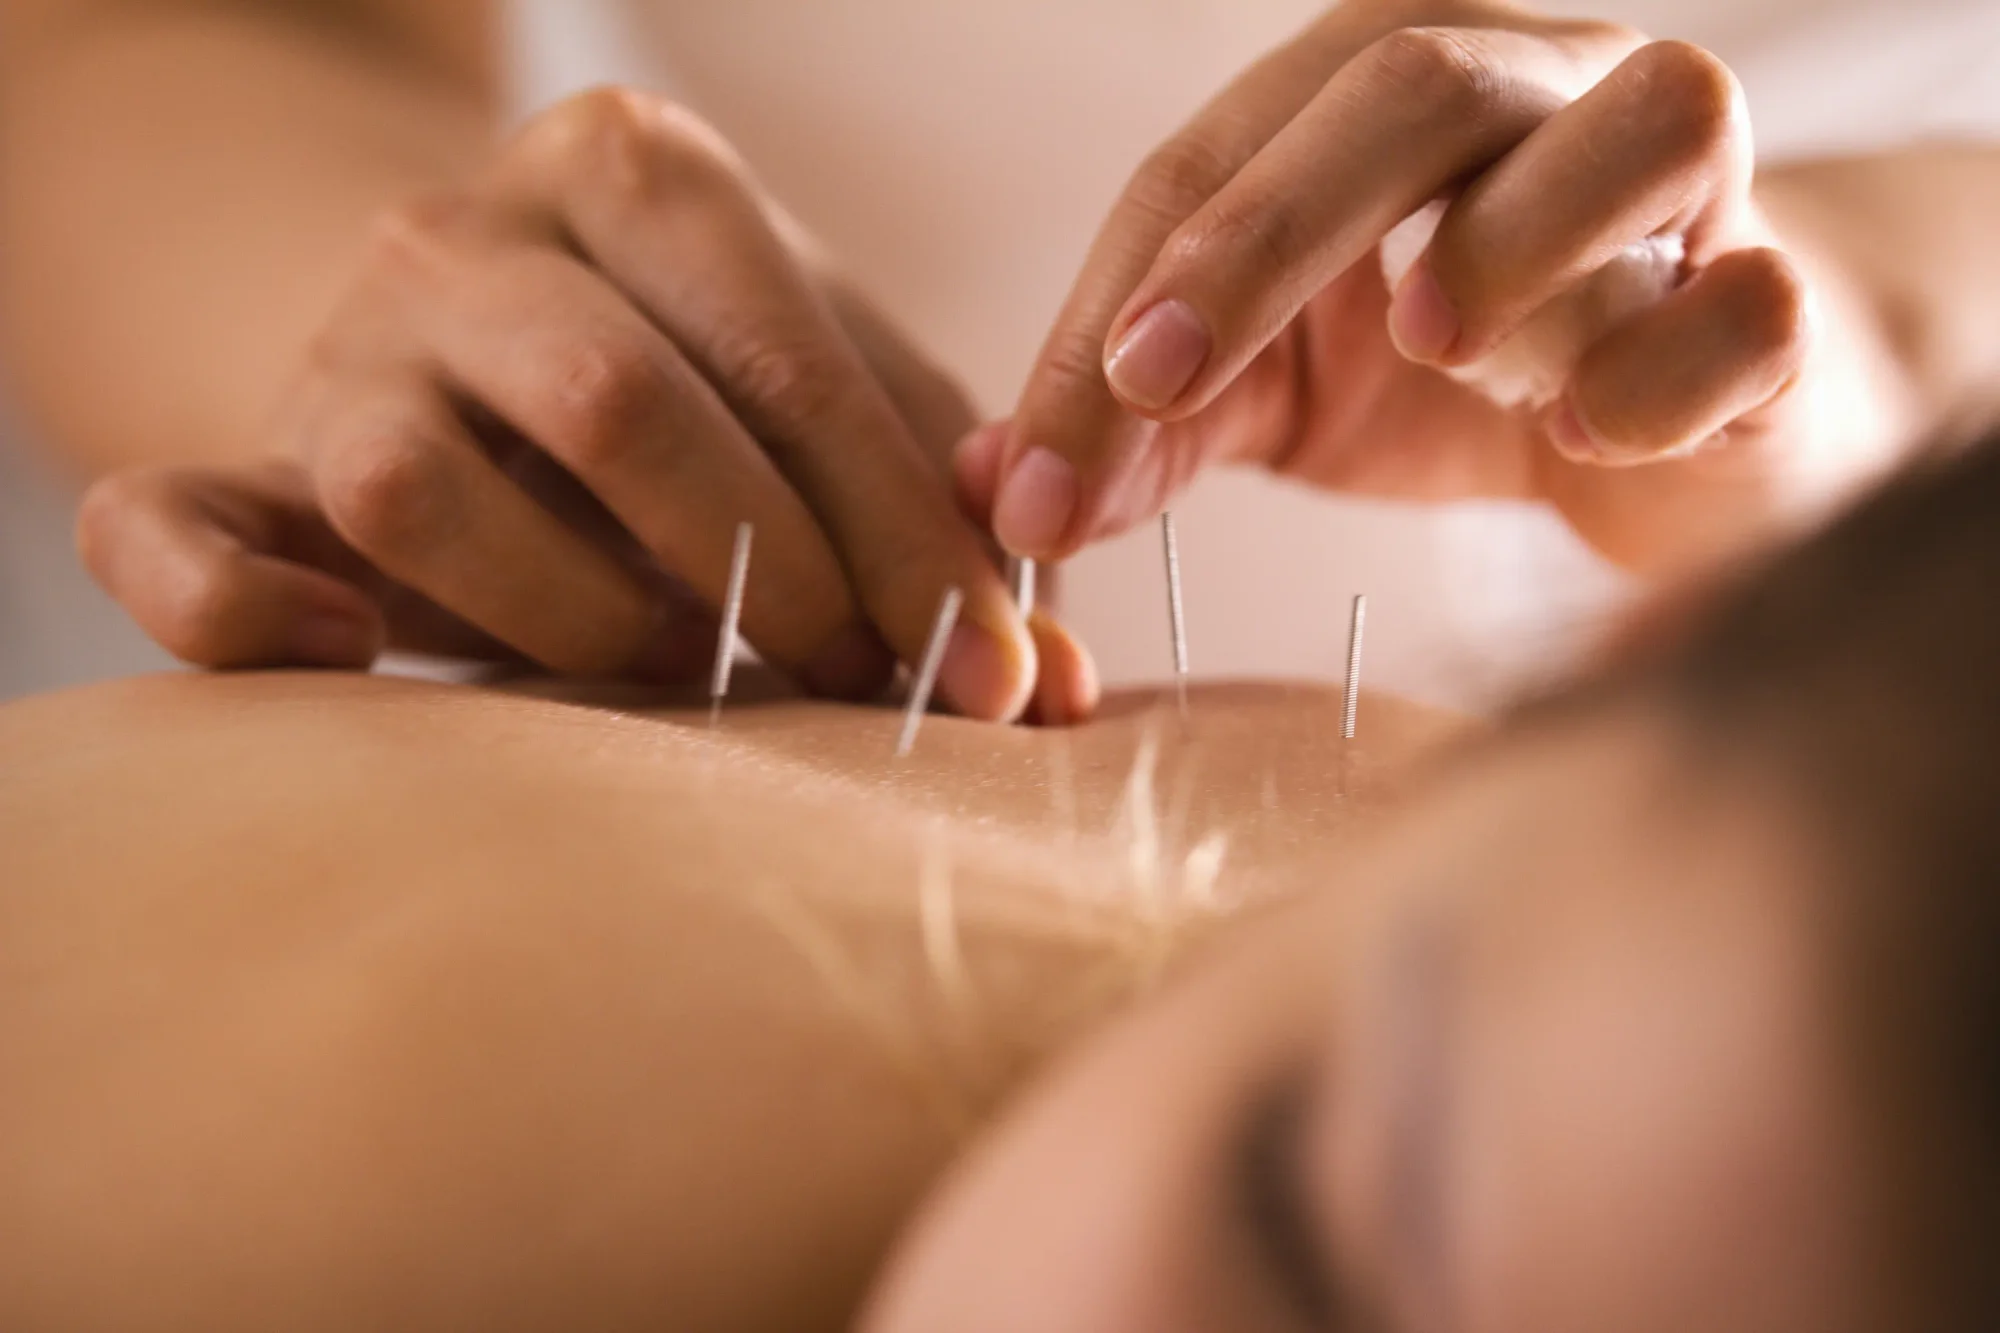 Woman getting acupuncture for neuropathy.